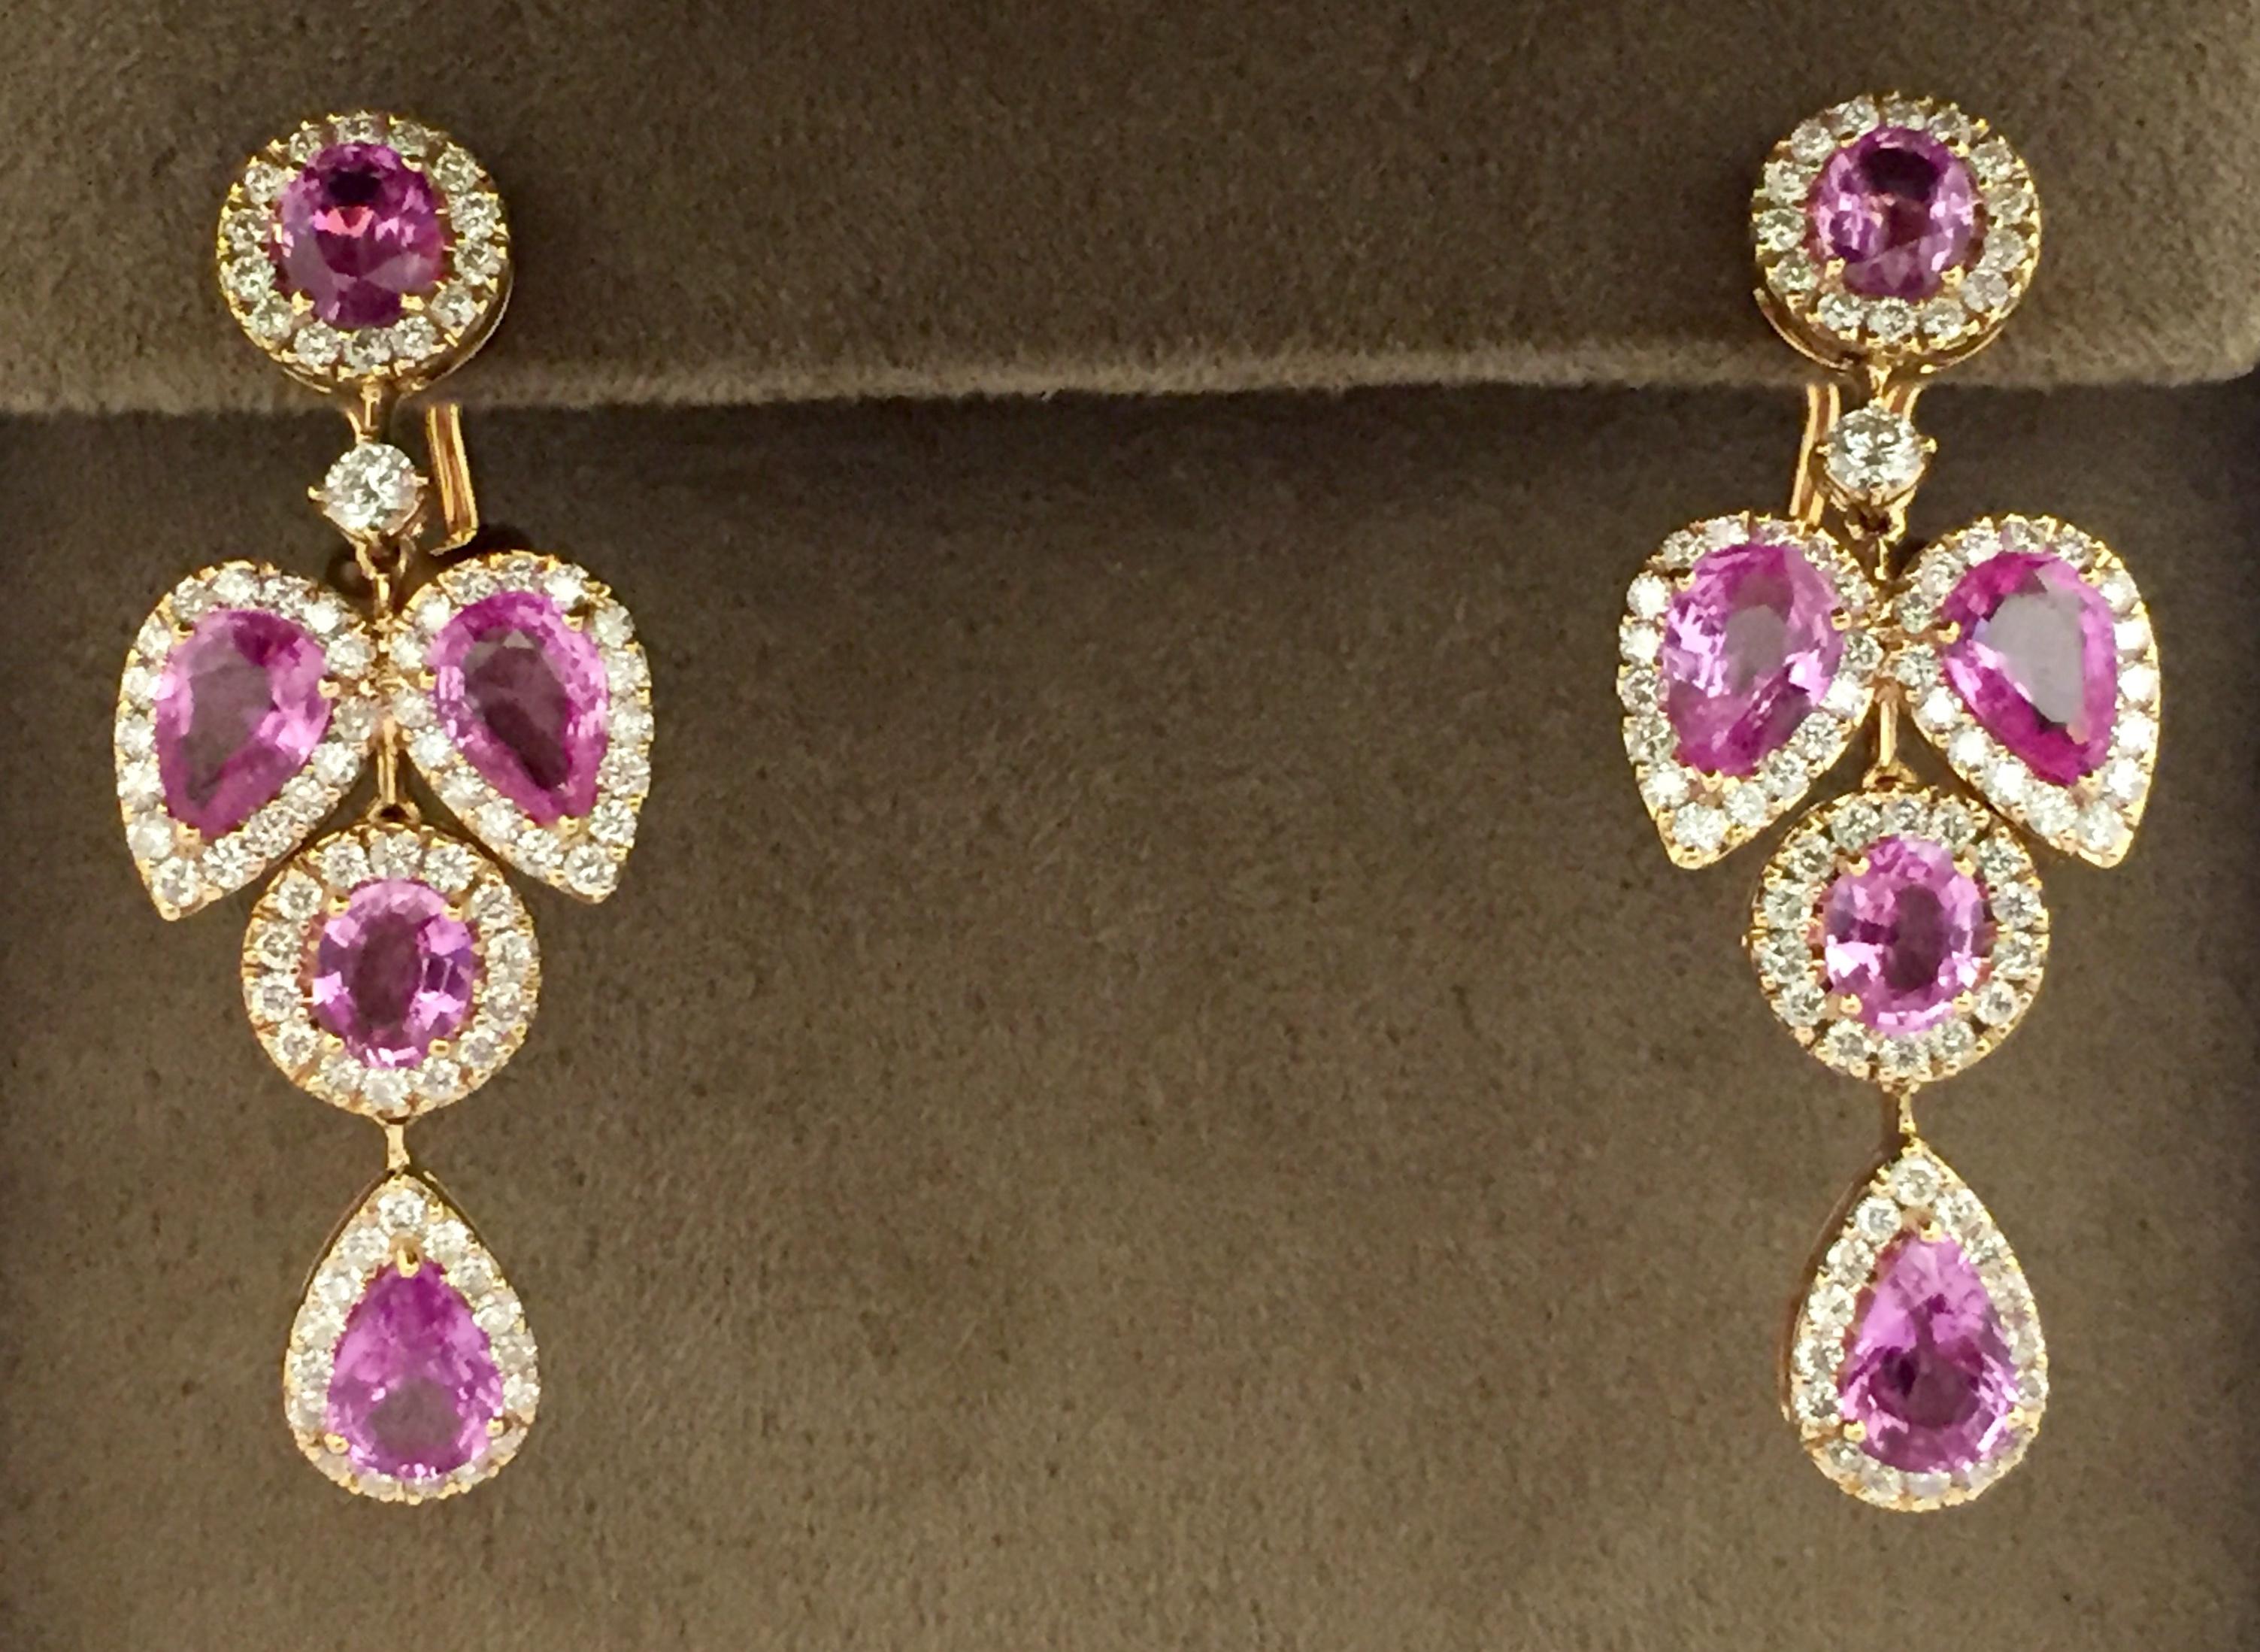 Round Cut Feminine Chandelier Rose Gold Earrings with Pink Sapphire and Diamonds